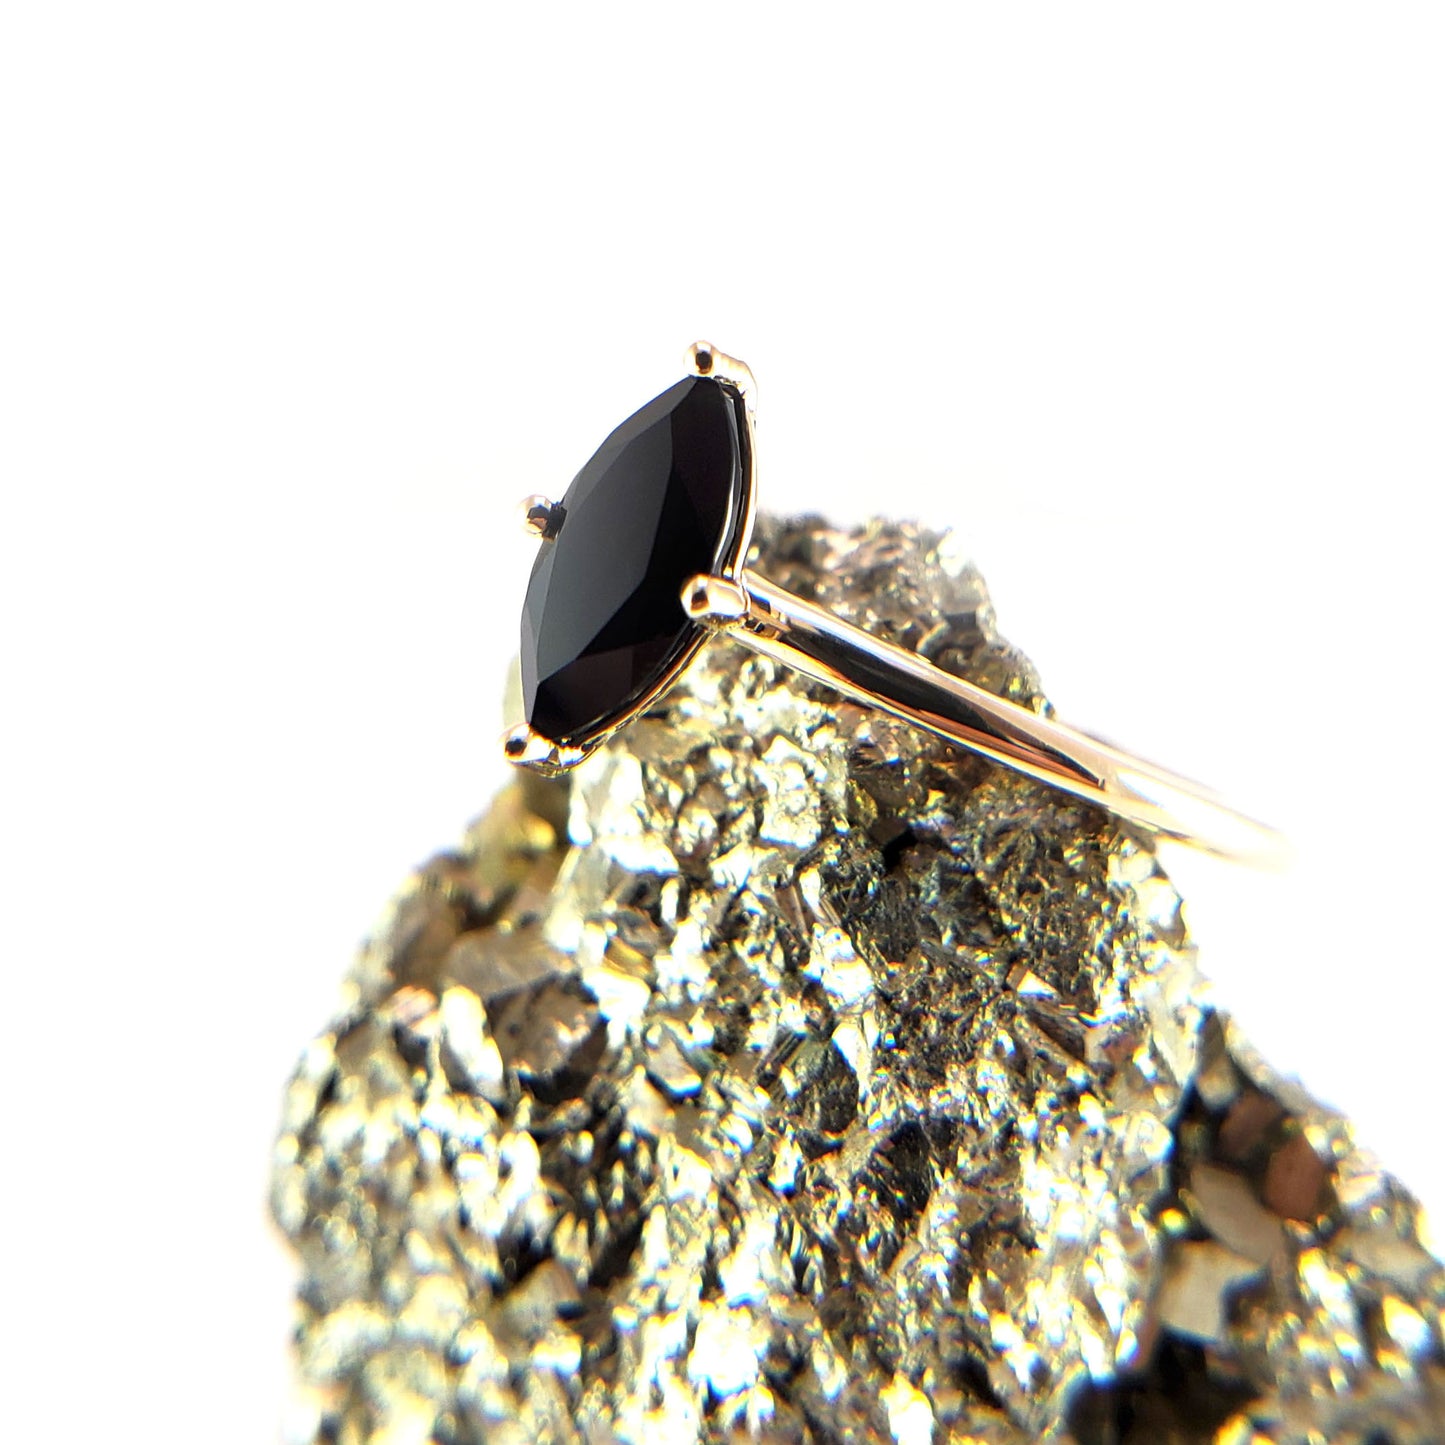 Black Marquise Solitaire Ring